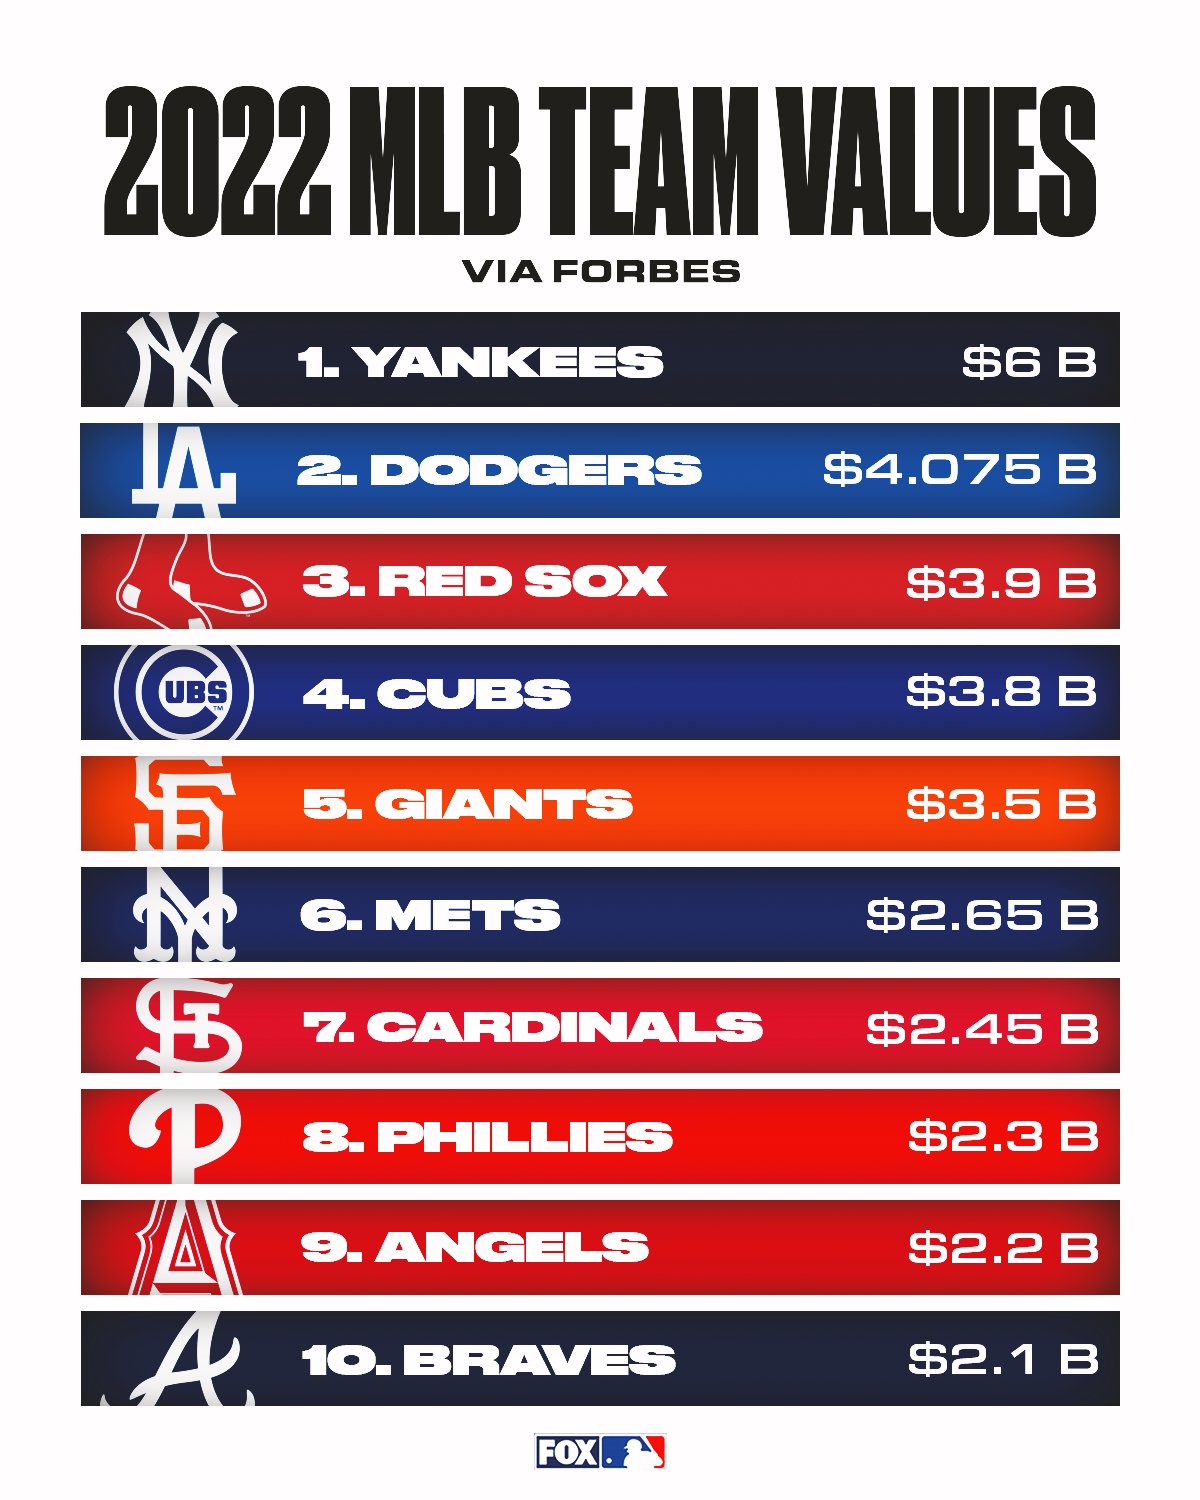 I. Introduction to MLB Team Valuation